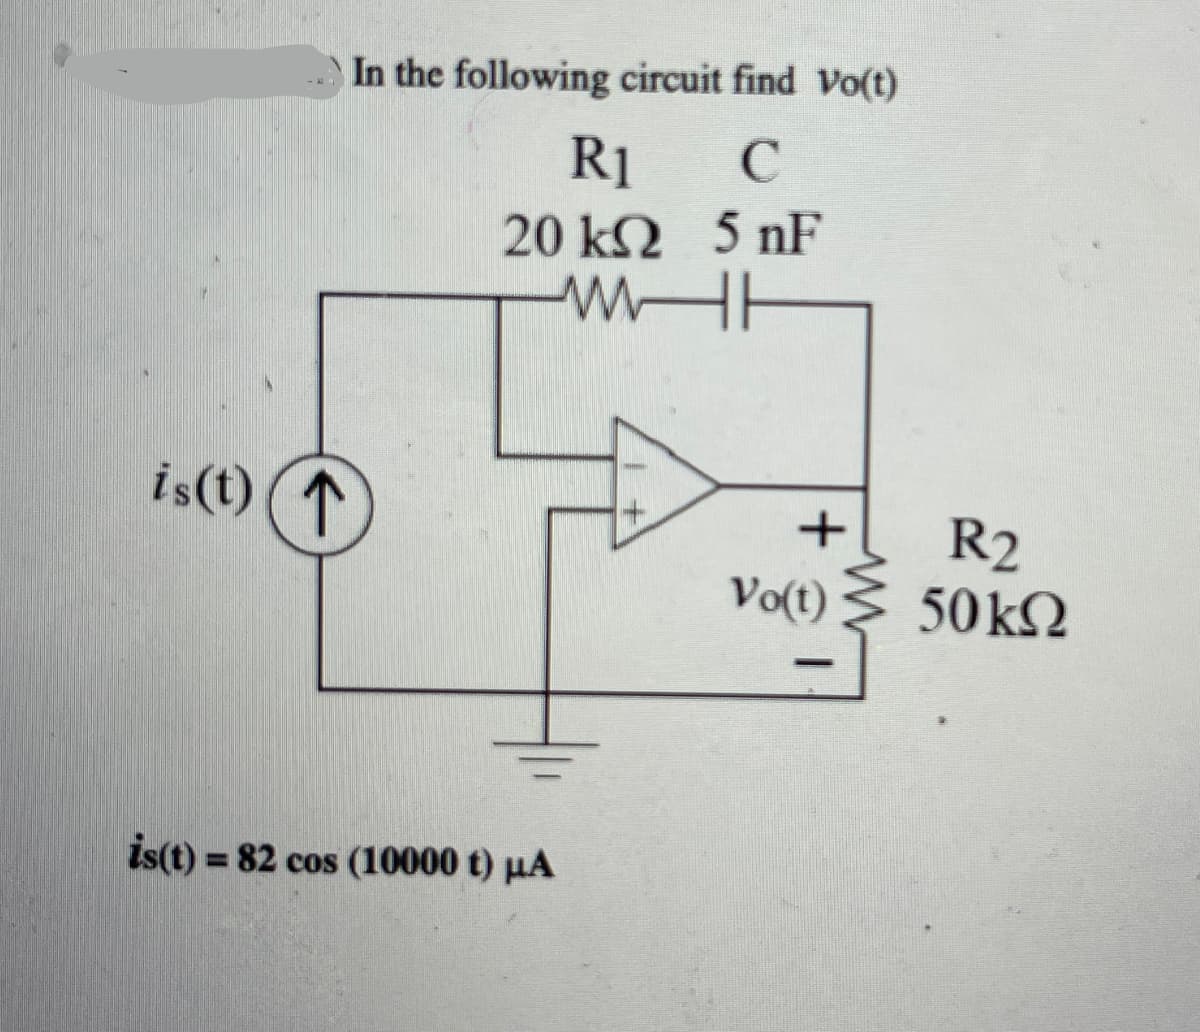 is(t) ↑
In the following circuit find Vo(t)
R1
C
20 kΩ 5 nF
WH
is(t)= 82 cos (10000 t) µA
+
+
Vo(t)
-
R2
50 ΚΩ